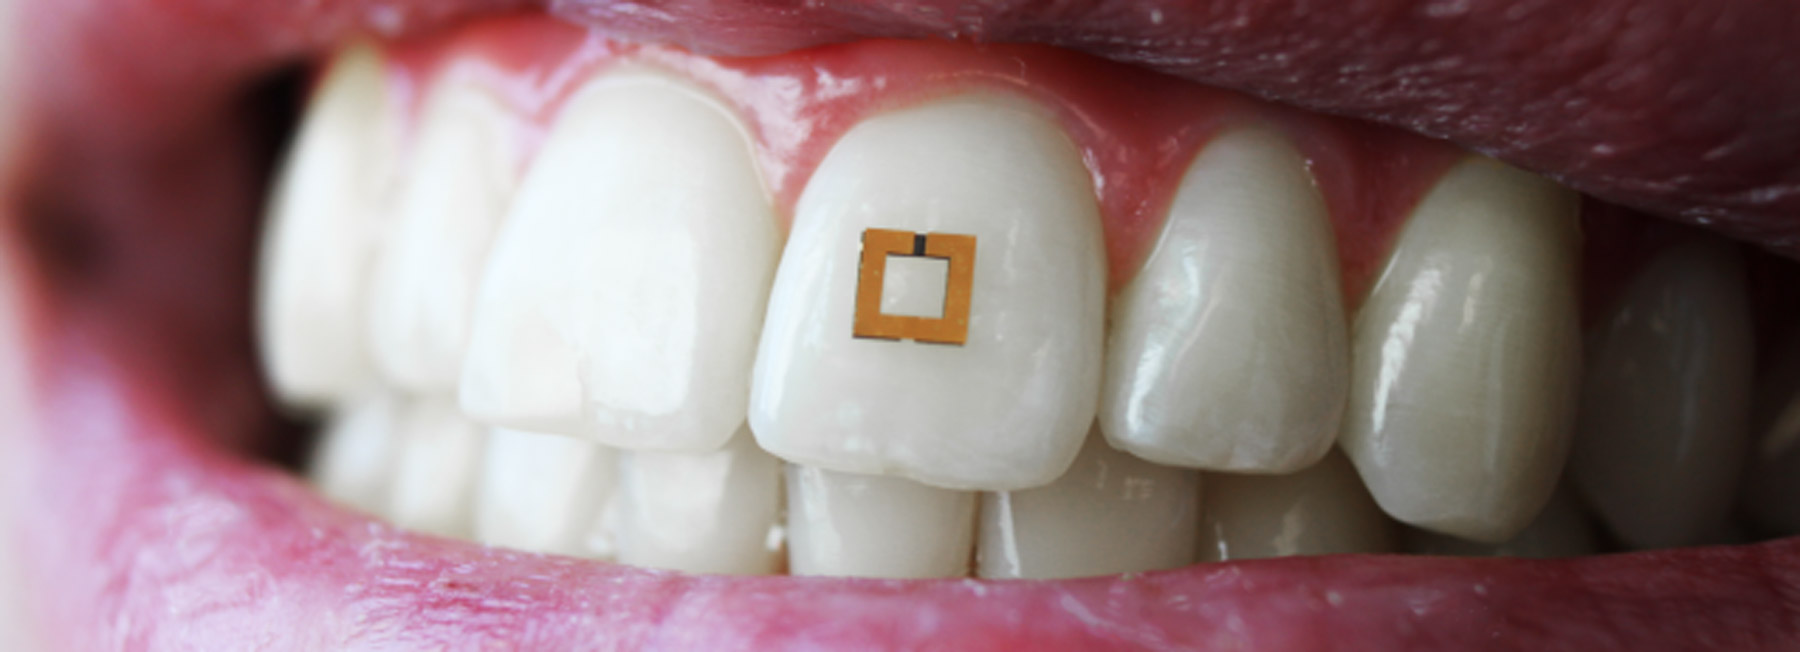 scientists developed a golden sticker for your tooth to track how much you eat